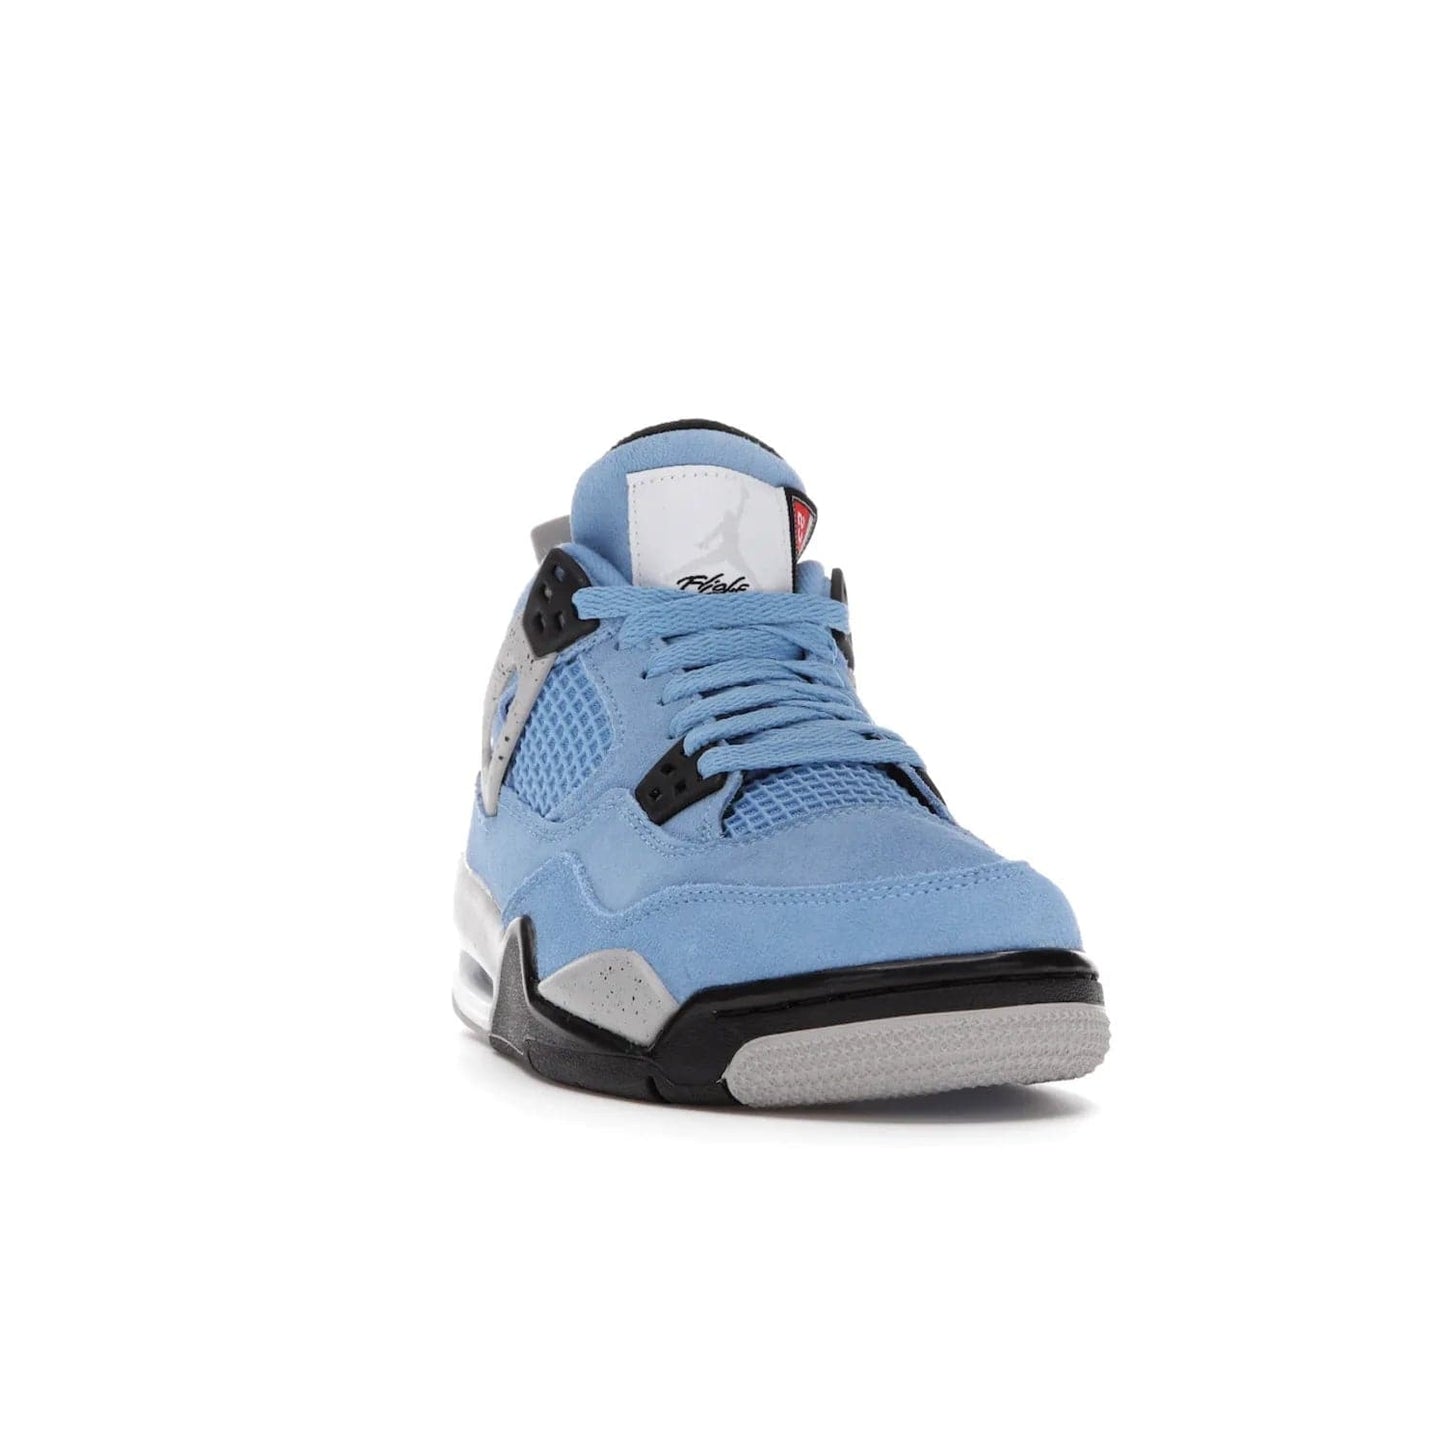 Jordan 4 Retro University Blue (GS) - Image 8 - Only at www.BallersClubKickz.com - Air Jordan 4 Retro University Blue GS: Classic silhouette and vibrant colors. Featuring a suede upper and Jumpman icon, this grade school-size shoe is perfect for collections and retails at $150.